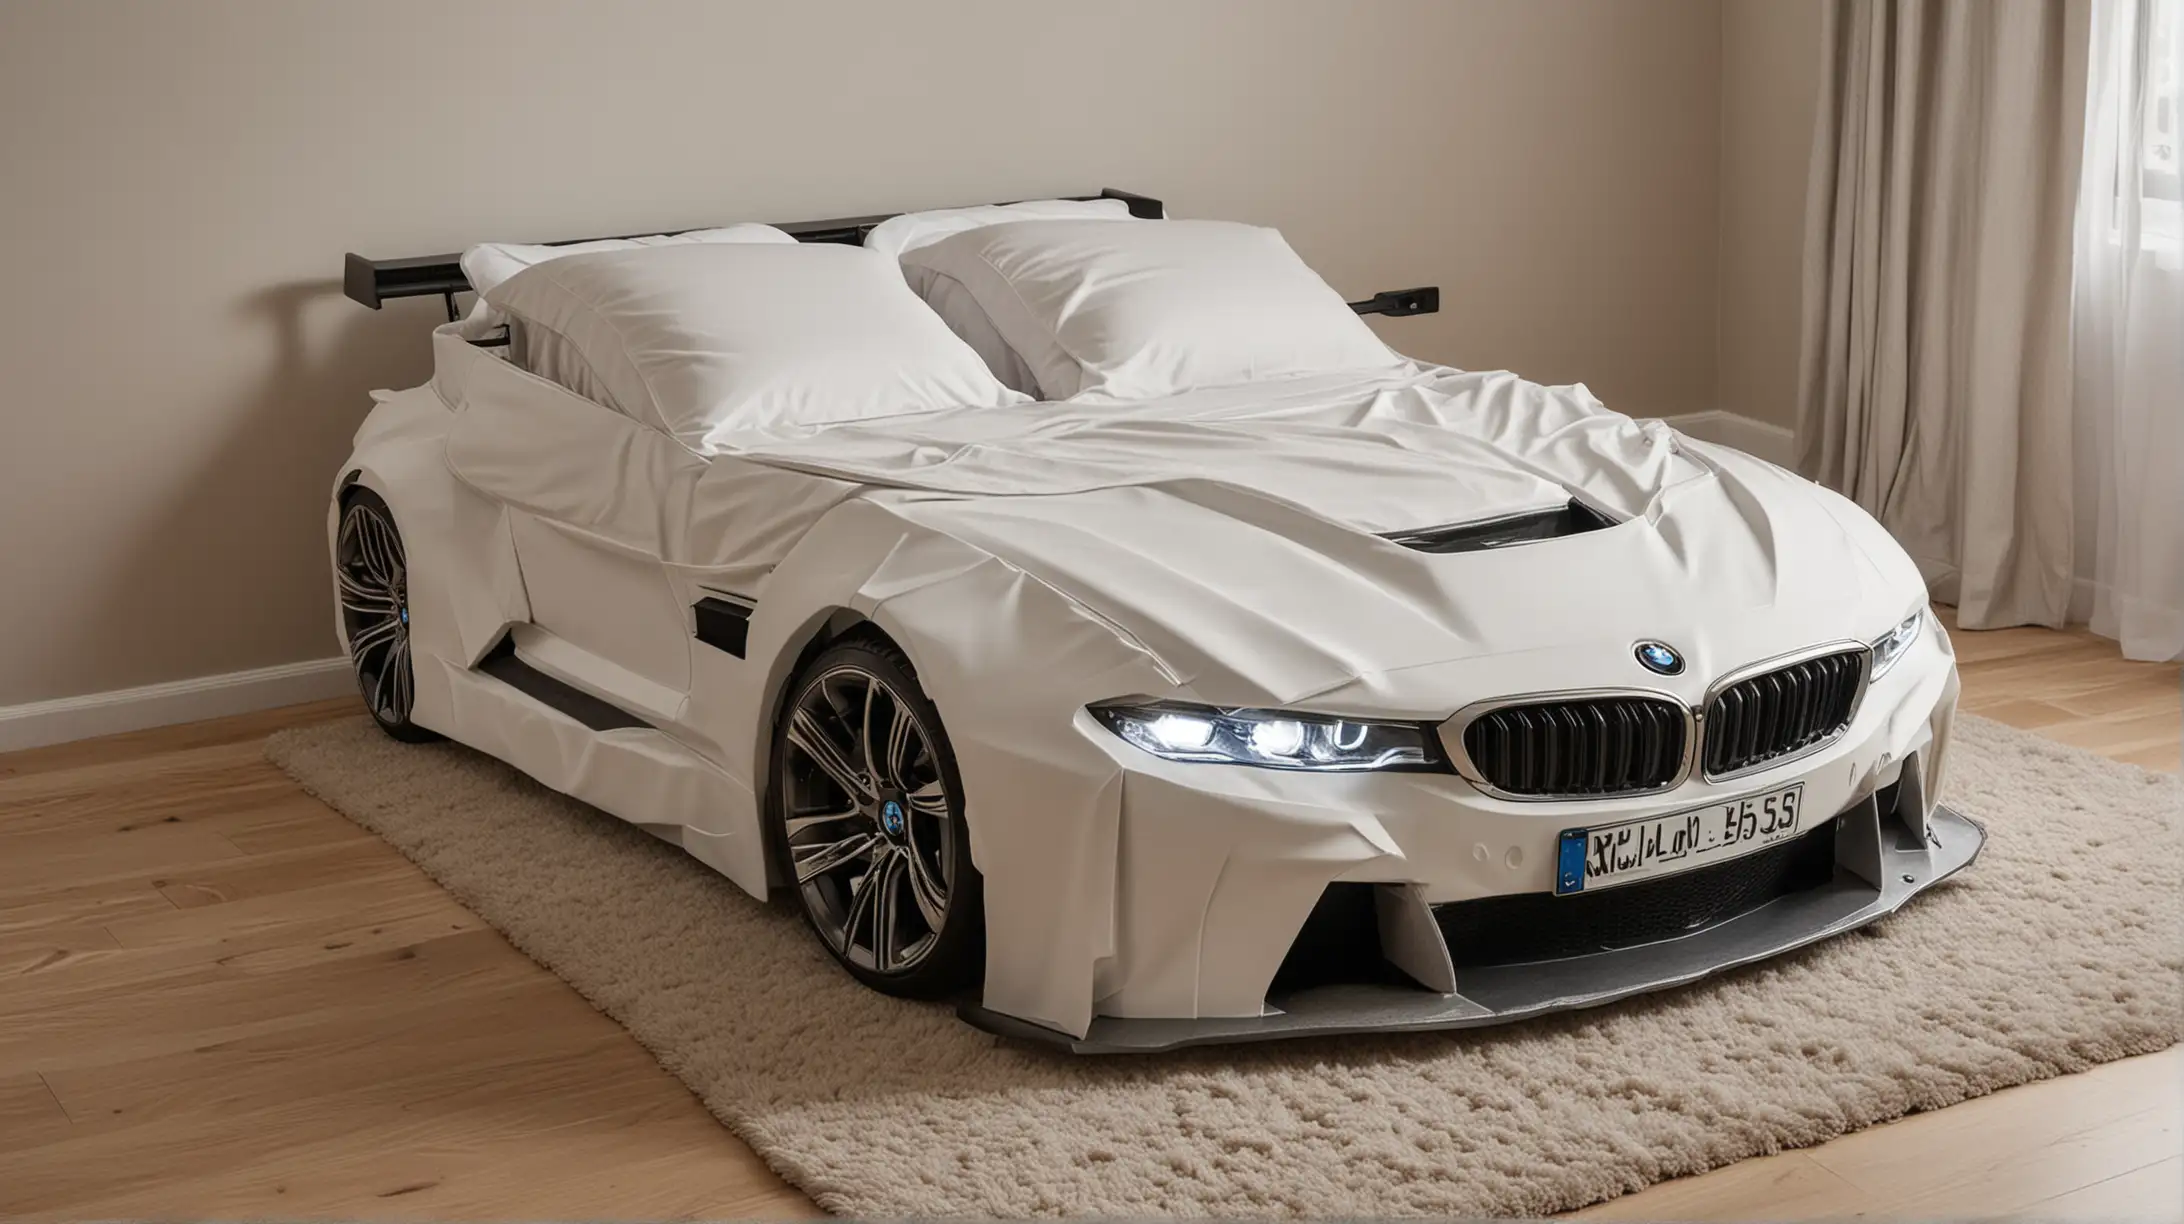 Luxurious TwoBed Bedroom with BMW Car Bedding